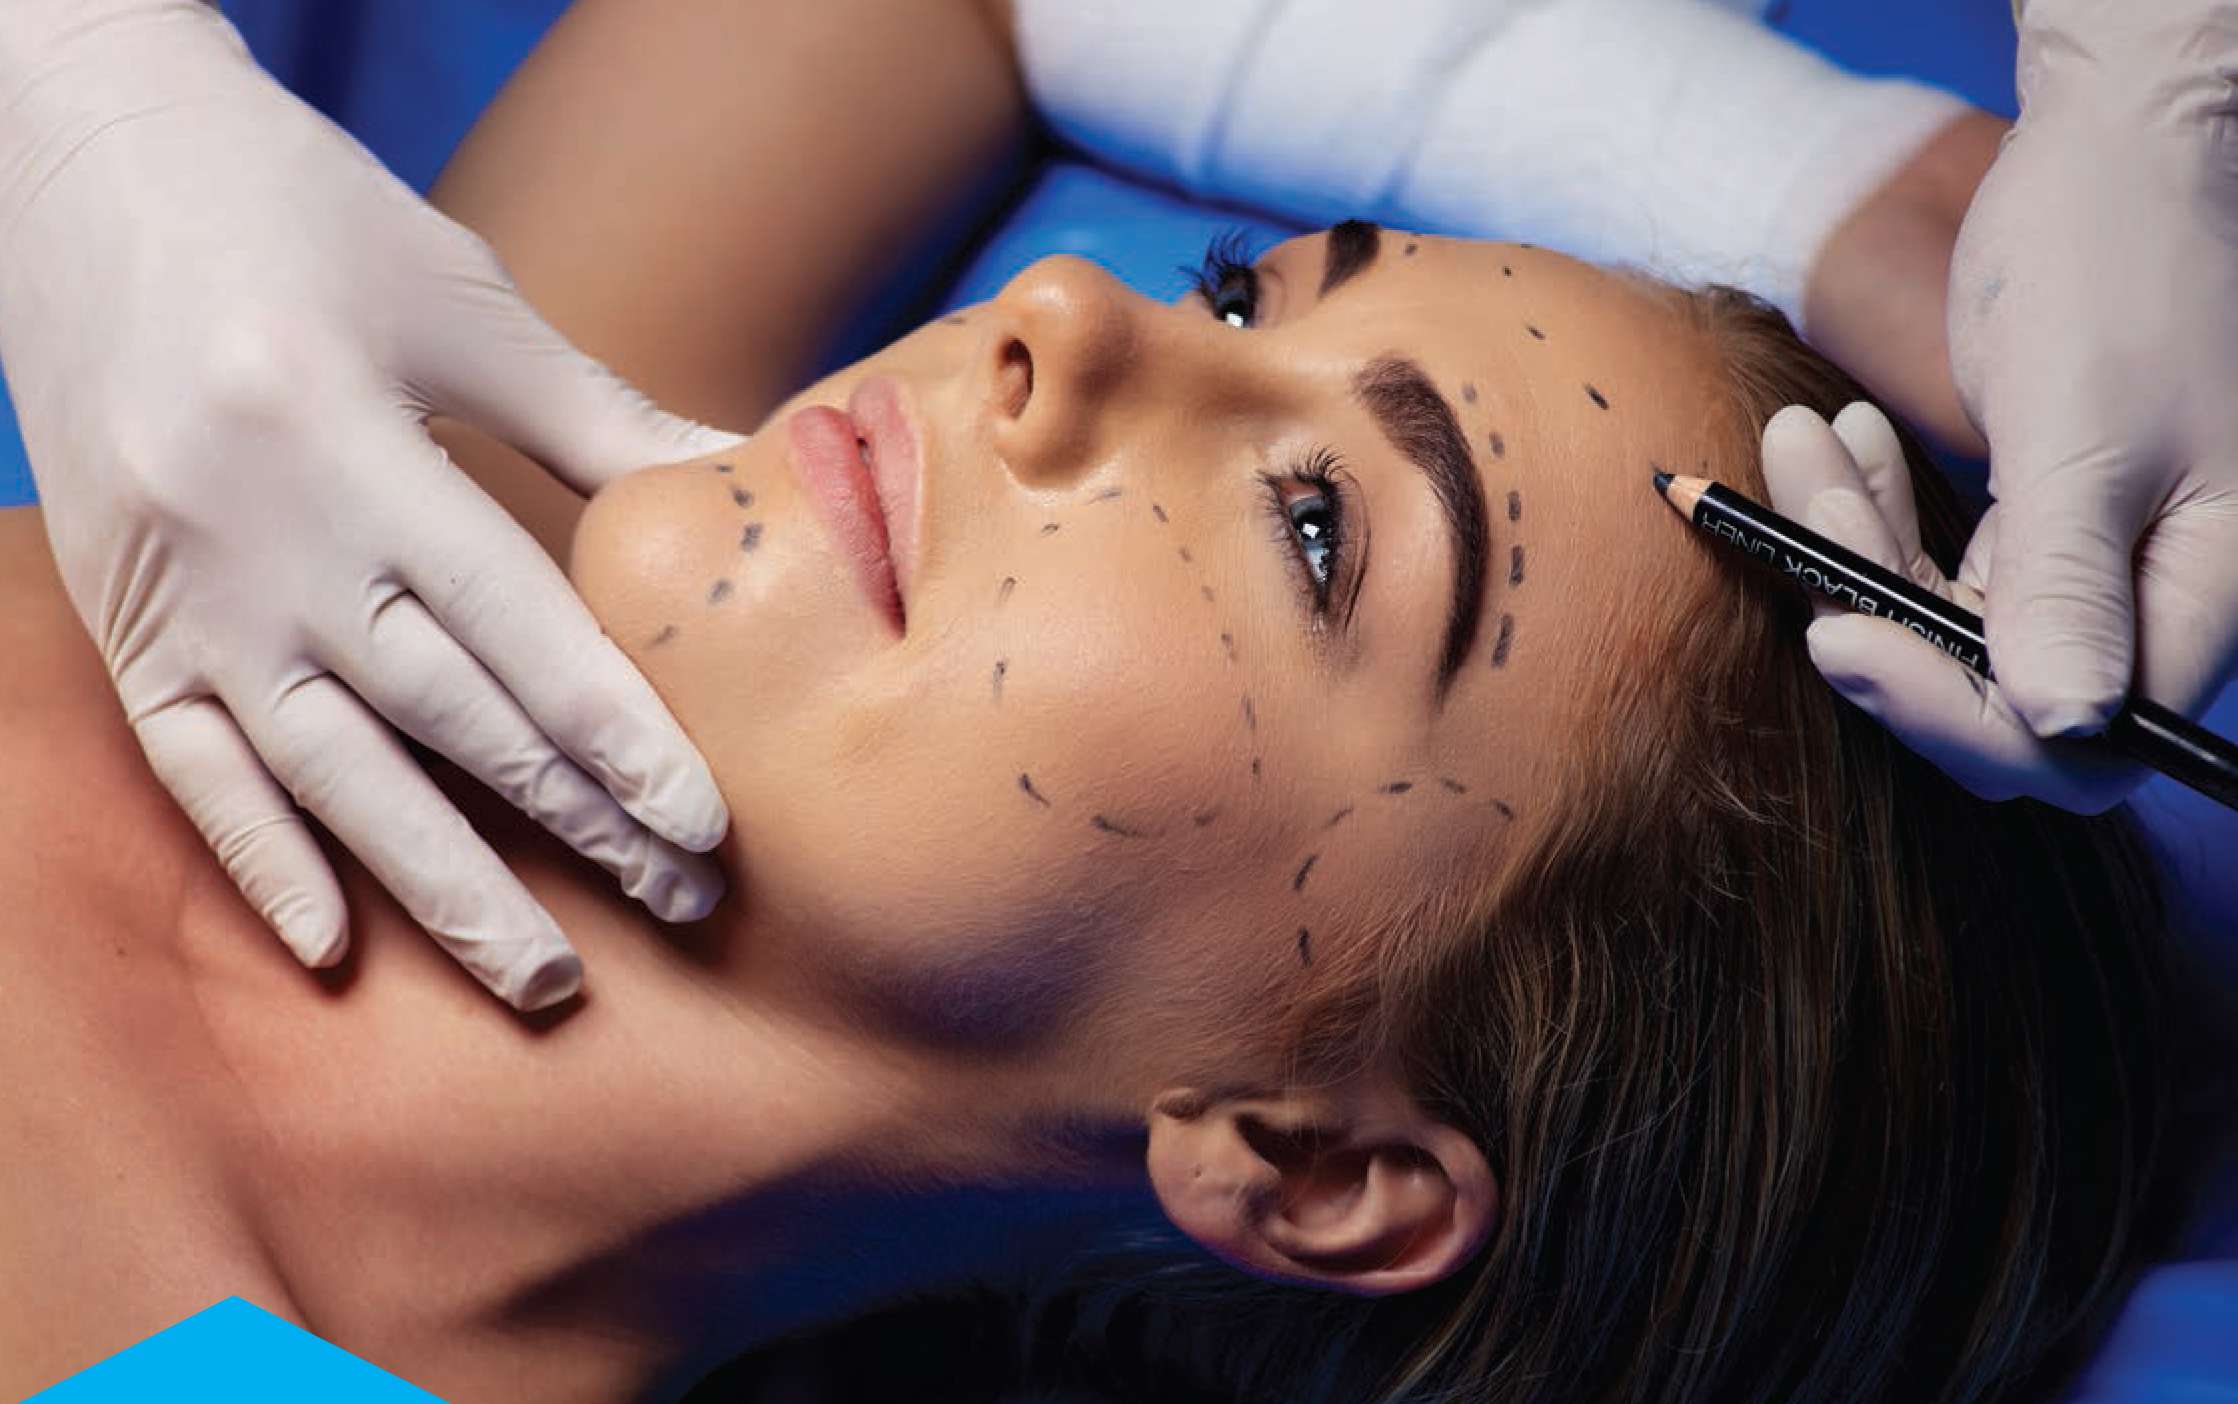 Keeping Cosmetic Surgery Safe